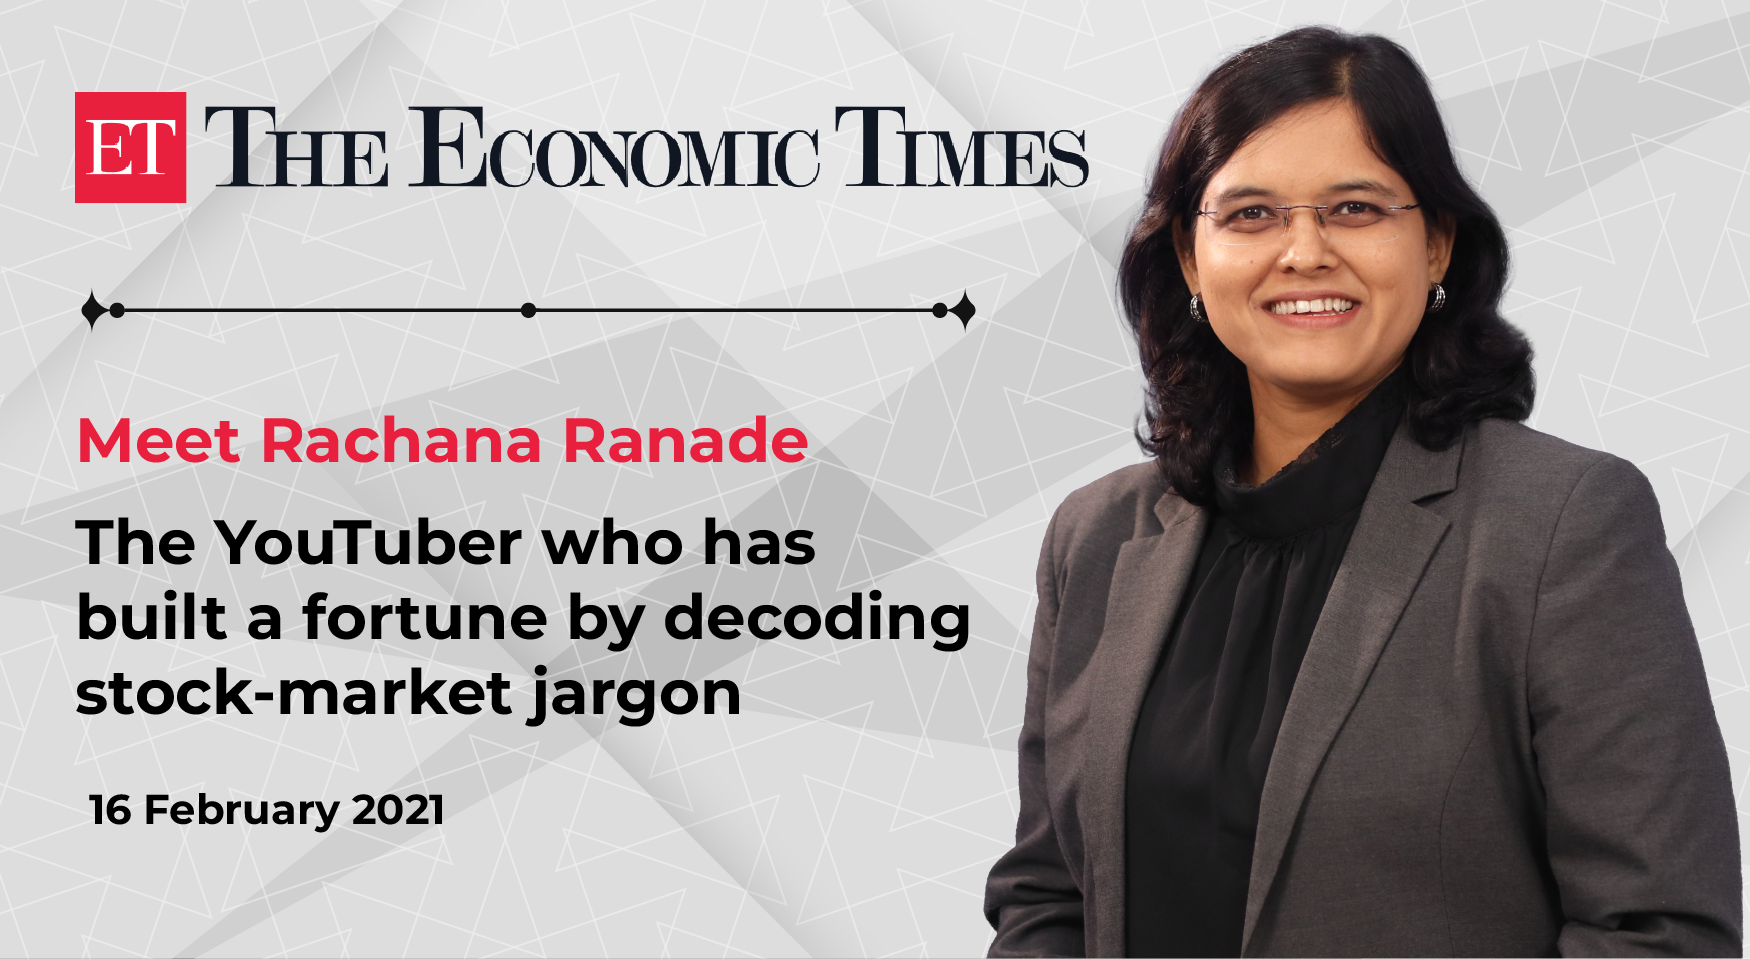 Meet Rachna Ranade - The youtuber who has built a fortune by decoding stock market